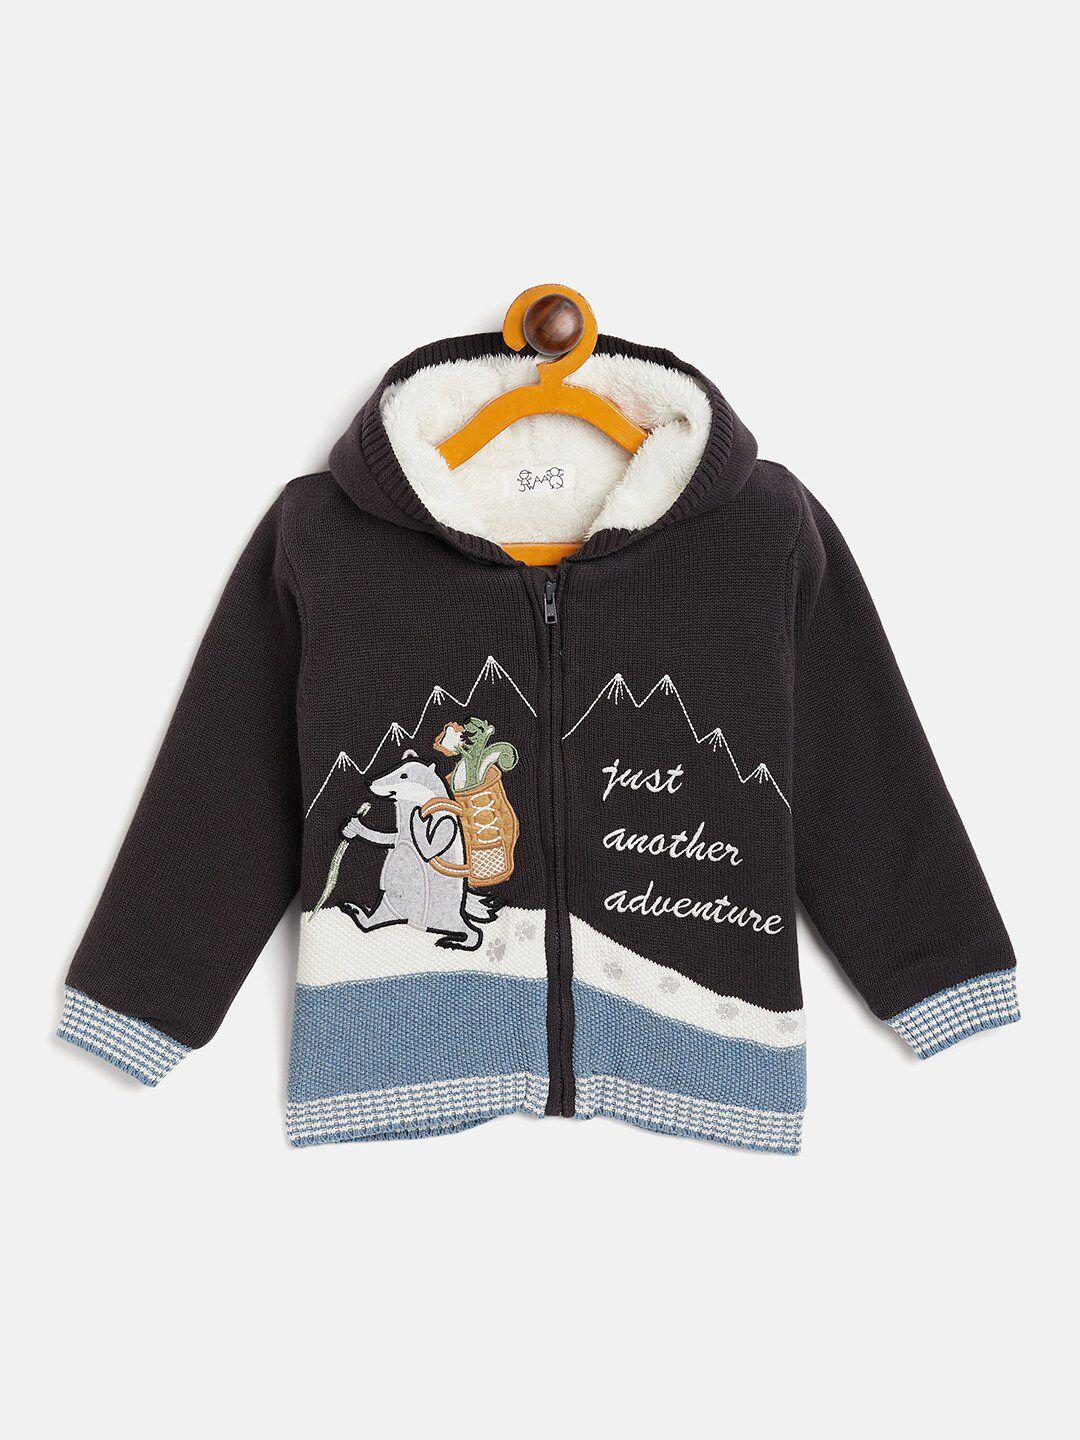 jwaaq unisex kids quirky printed embroidered hooded cardigan pure cotton sweater